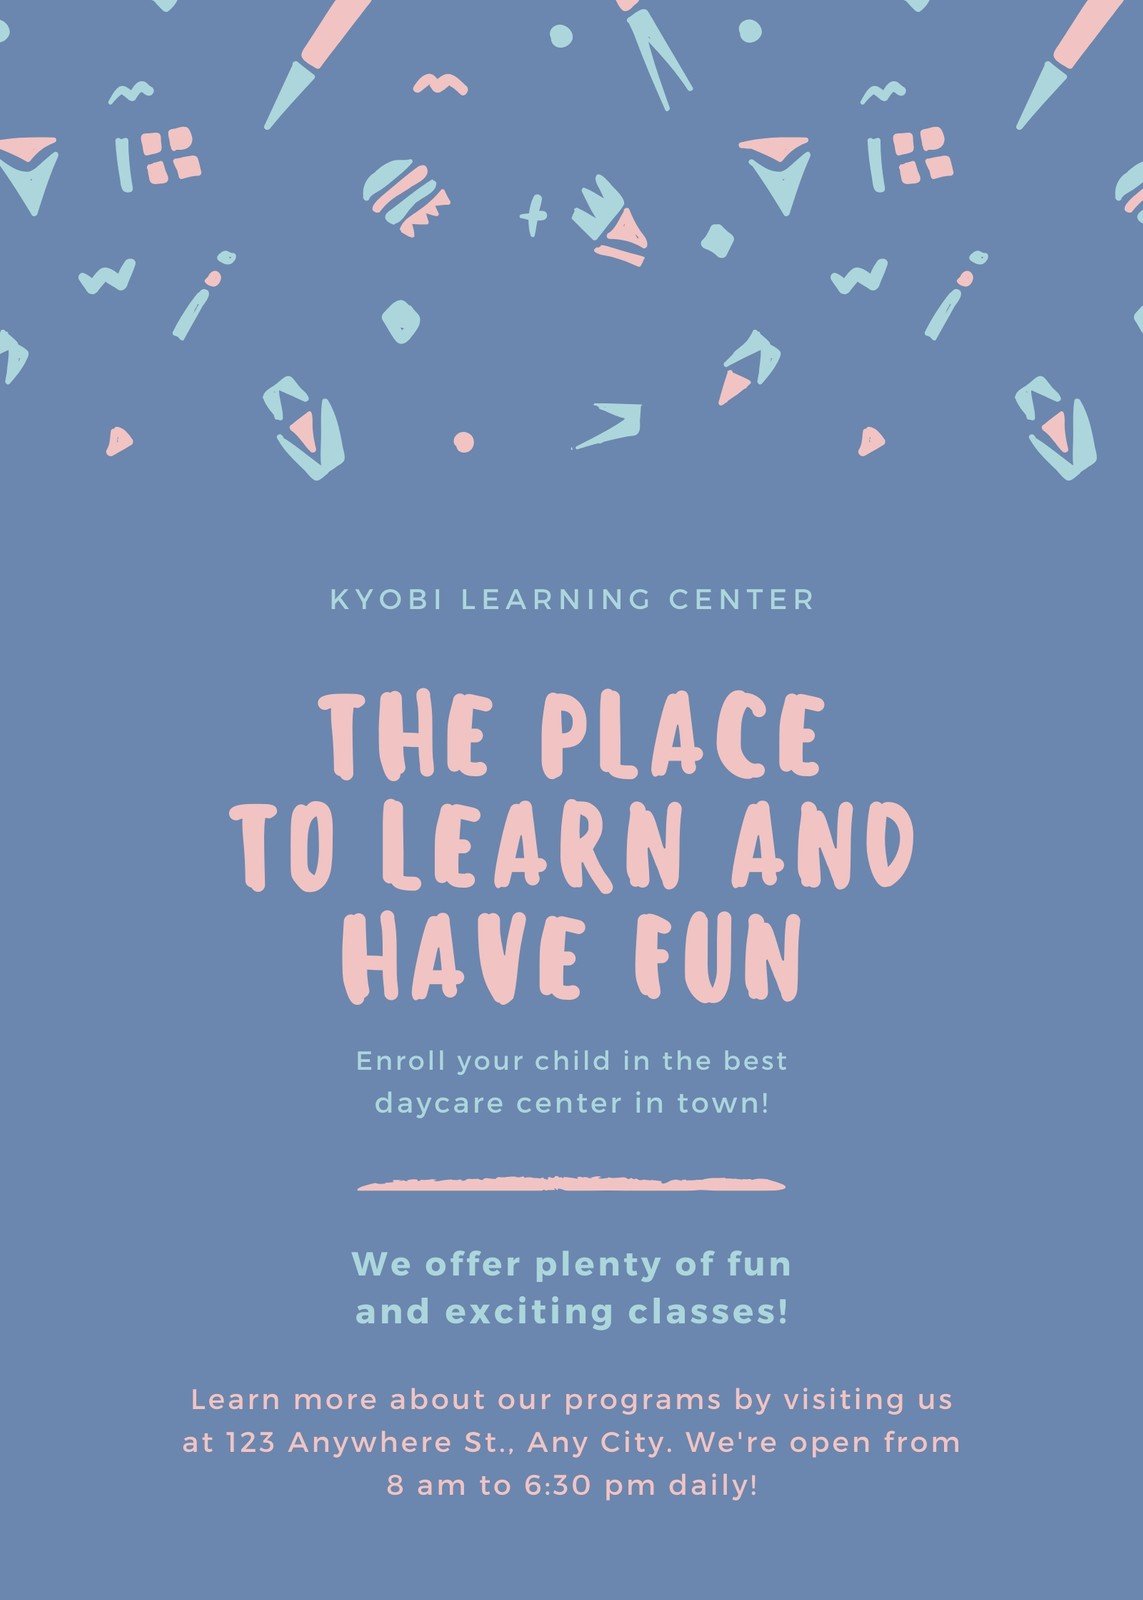 Customize 24+ Daycare Flyers Templates Online - Canva